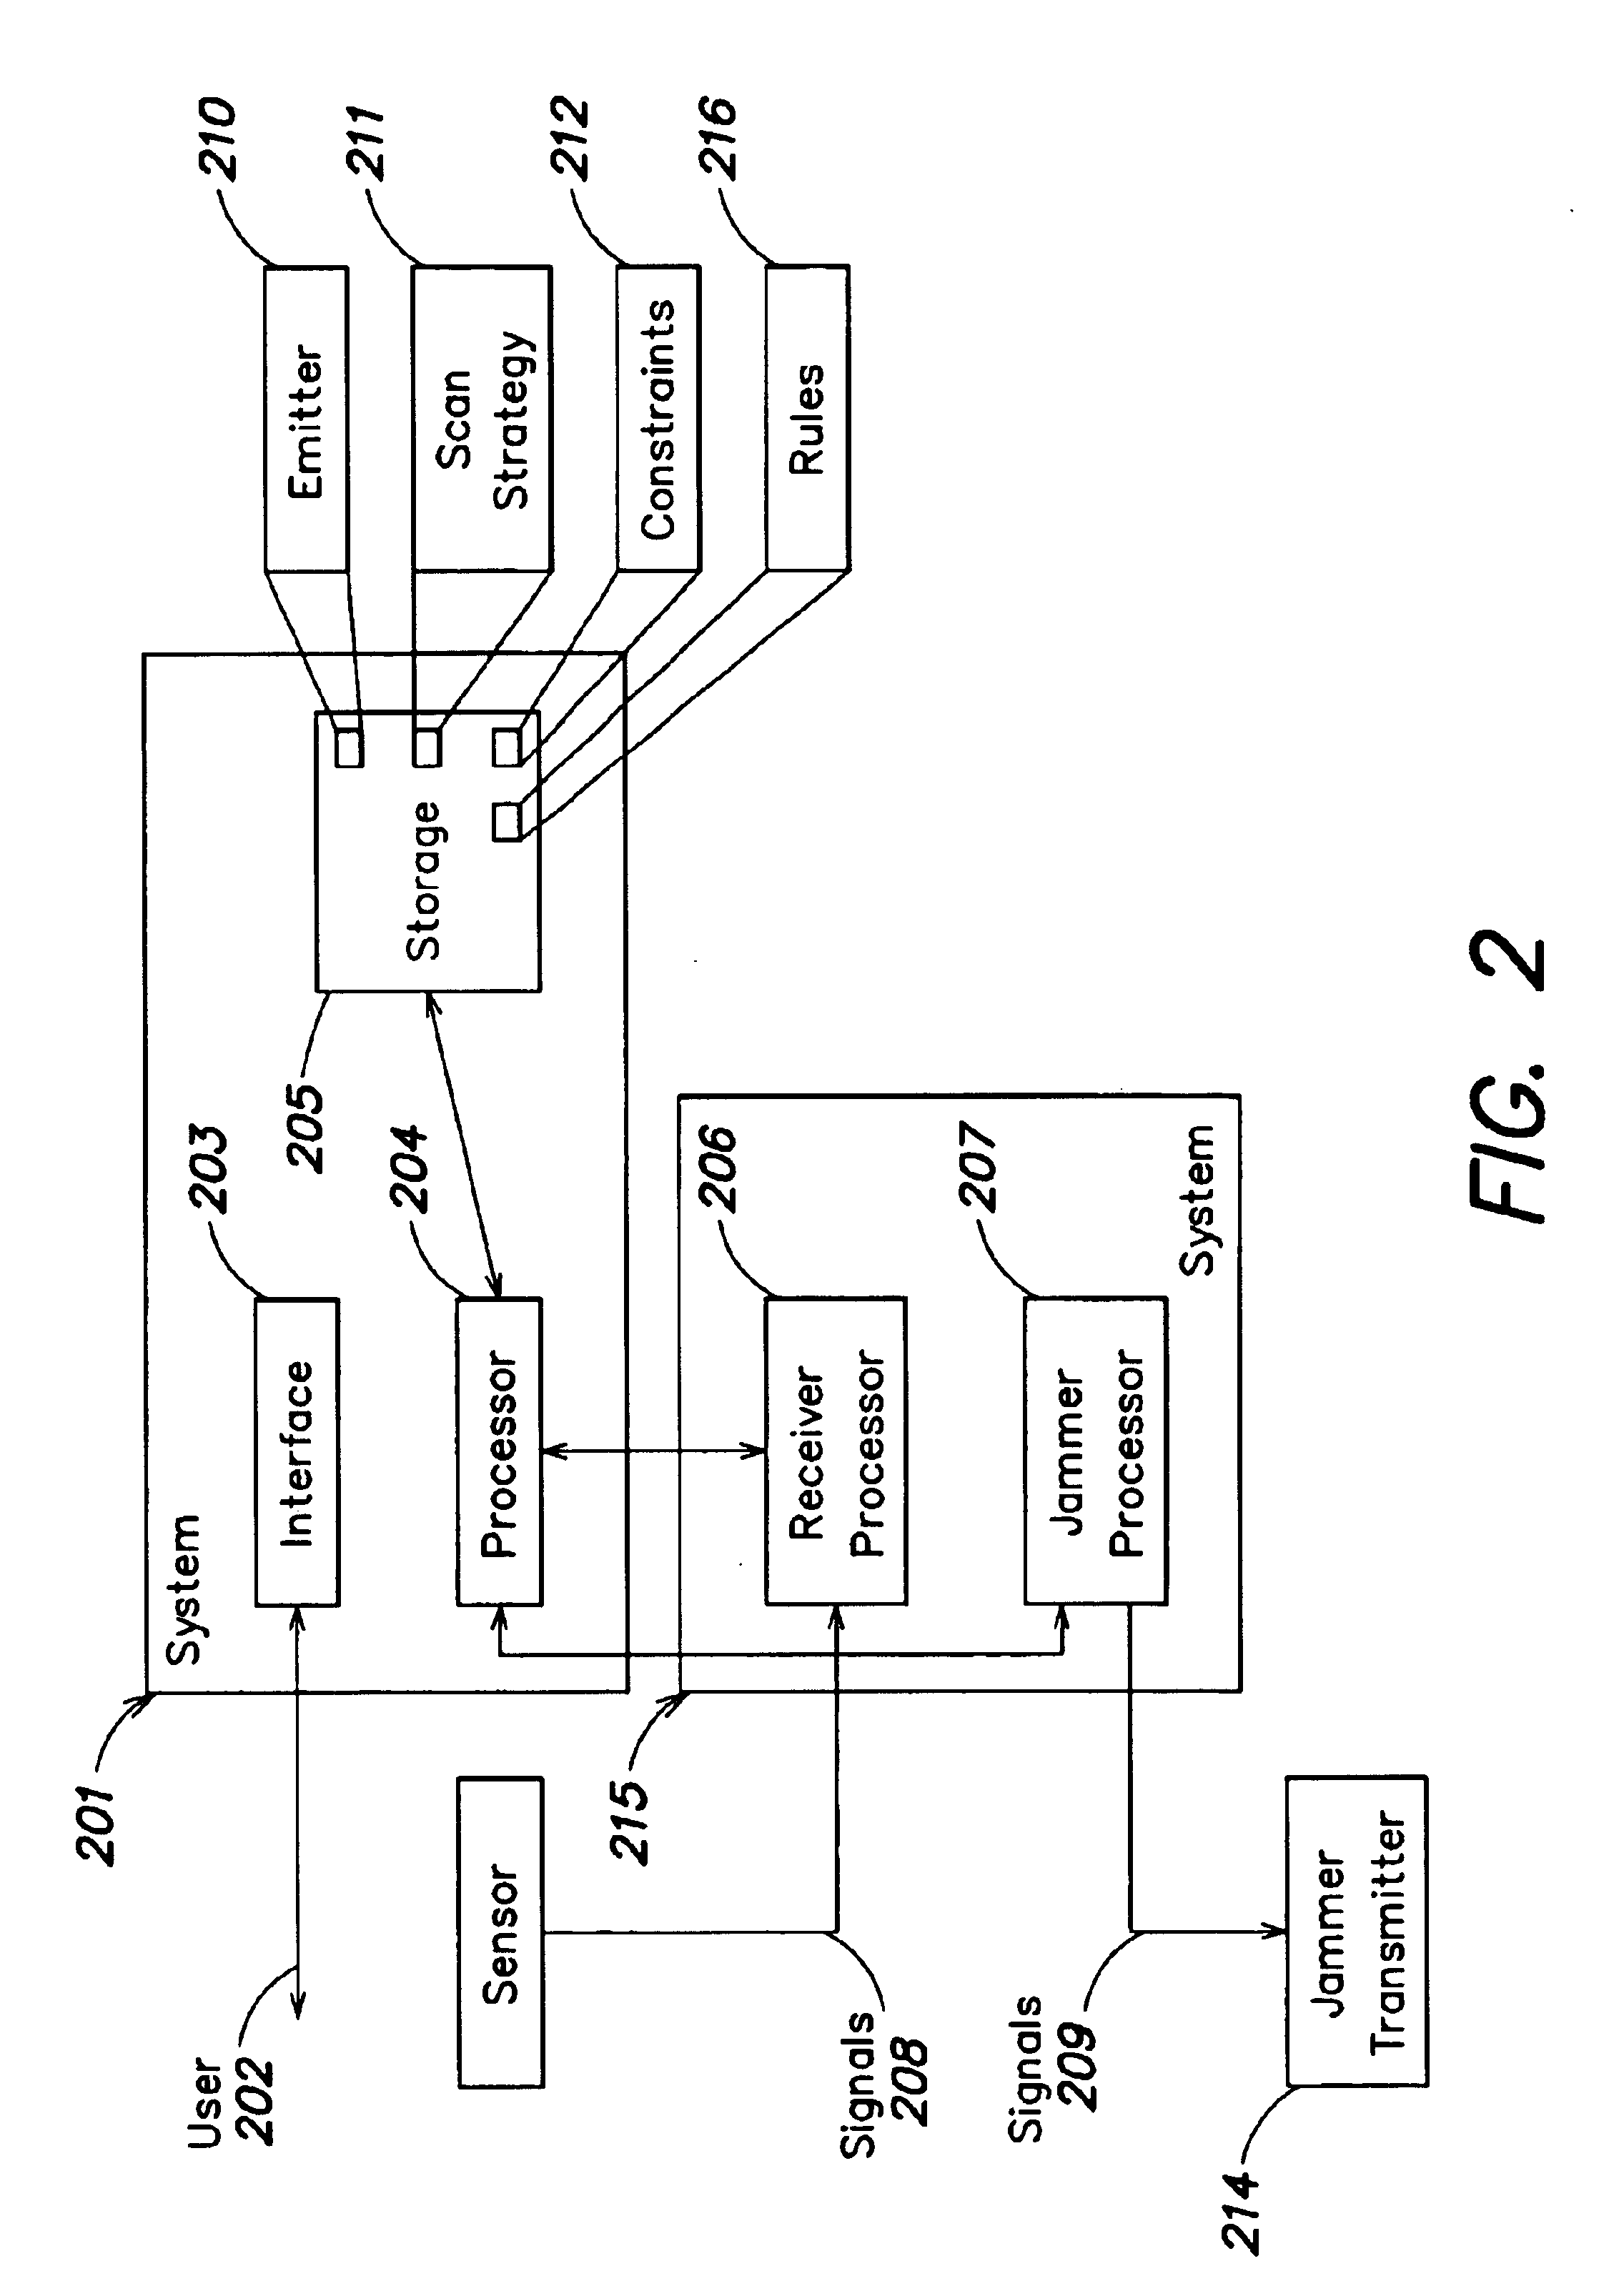 System and method for tuning step coverage gap correction in a scan strategy